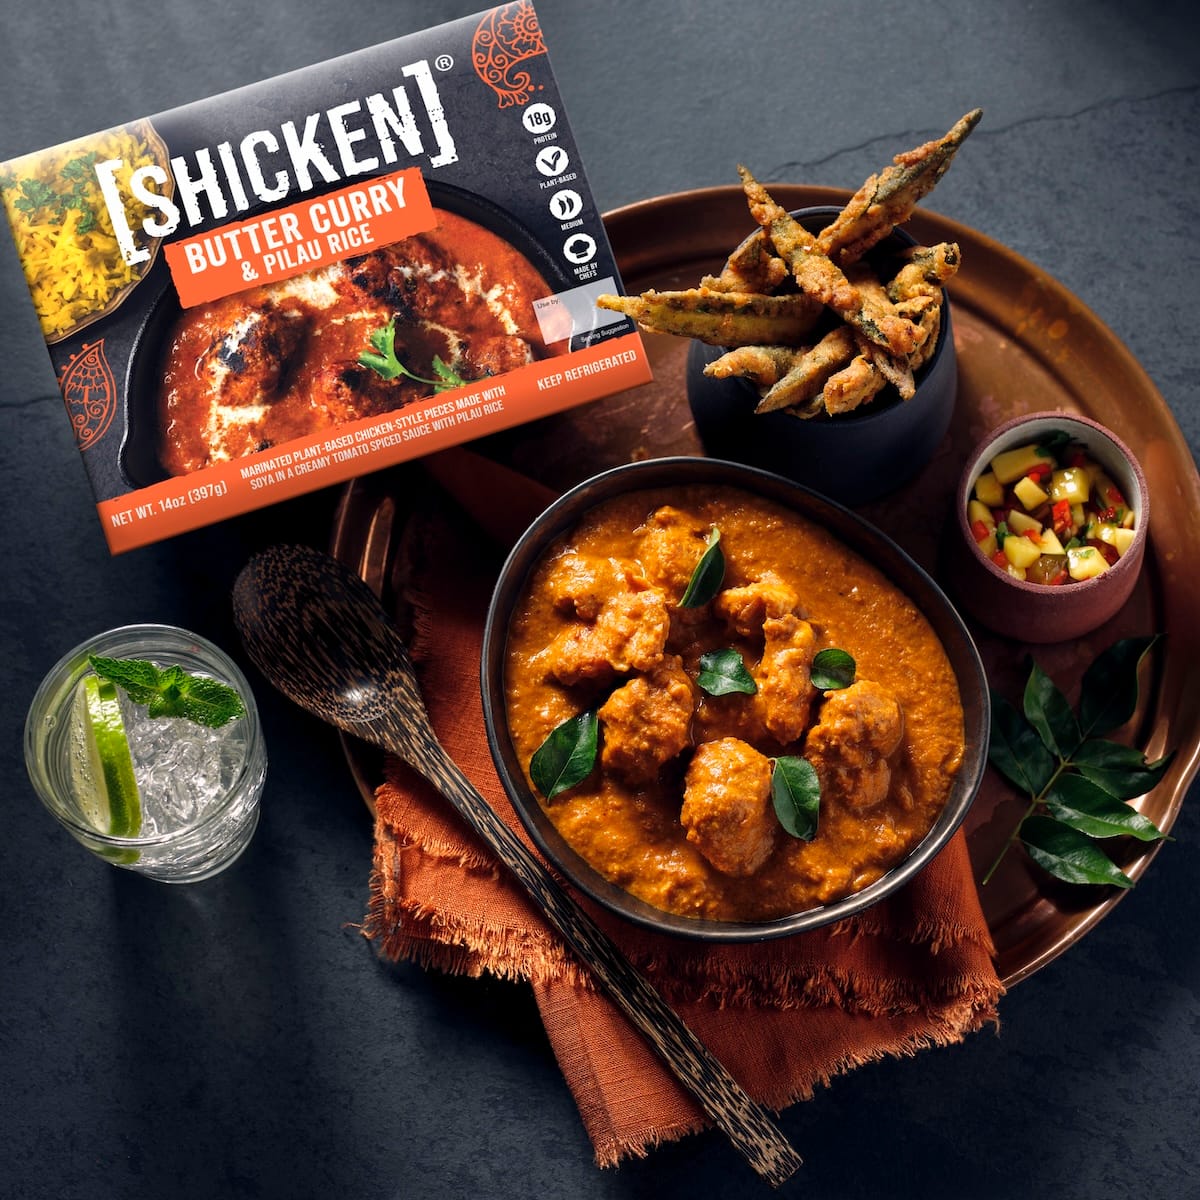 Inside SHICKEN's Kitchen: Where Tradition Meets Culinary Innovation